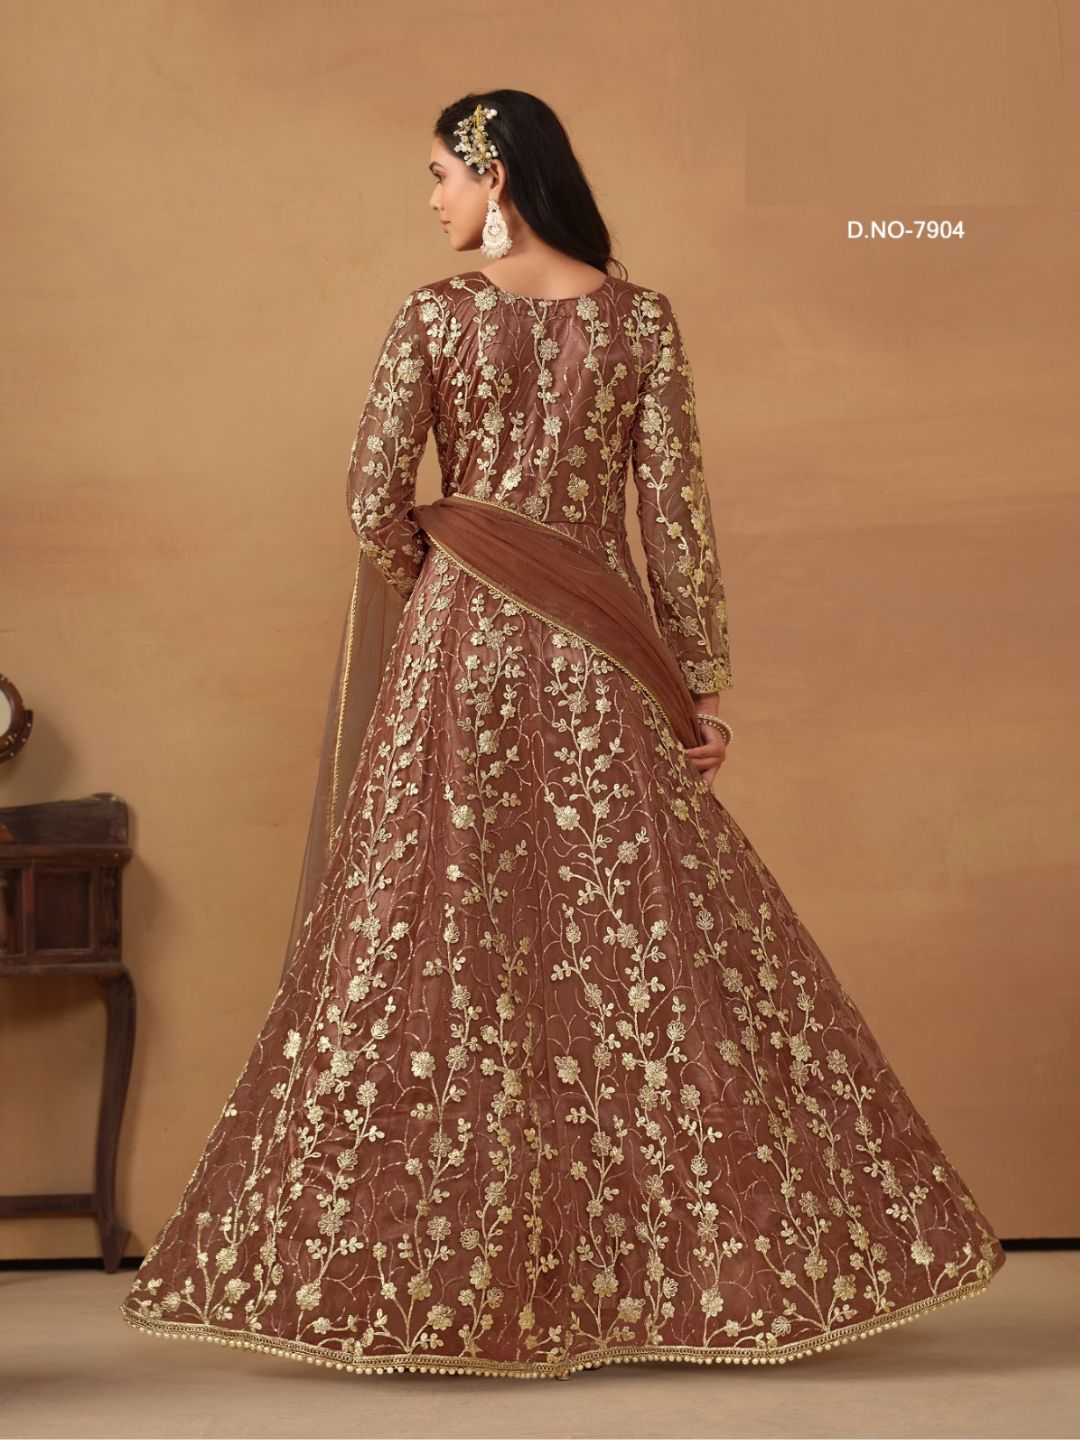 Net Embroidered Bollywood Salwar Kameez in Beige and Brown with Stone work-81992